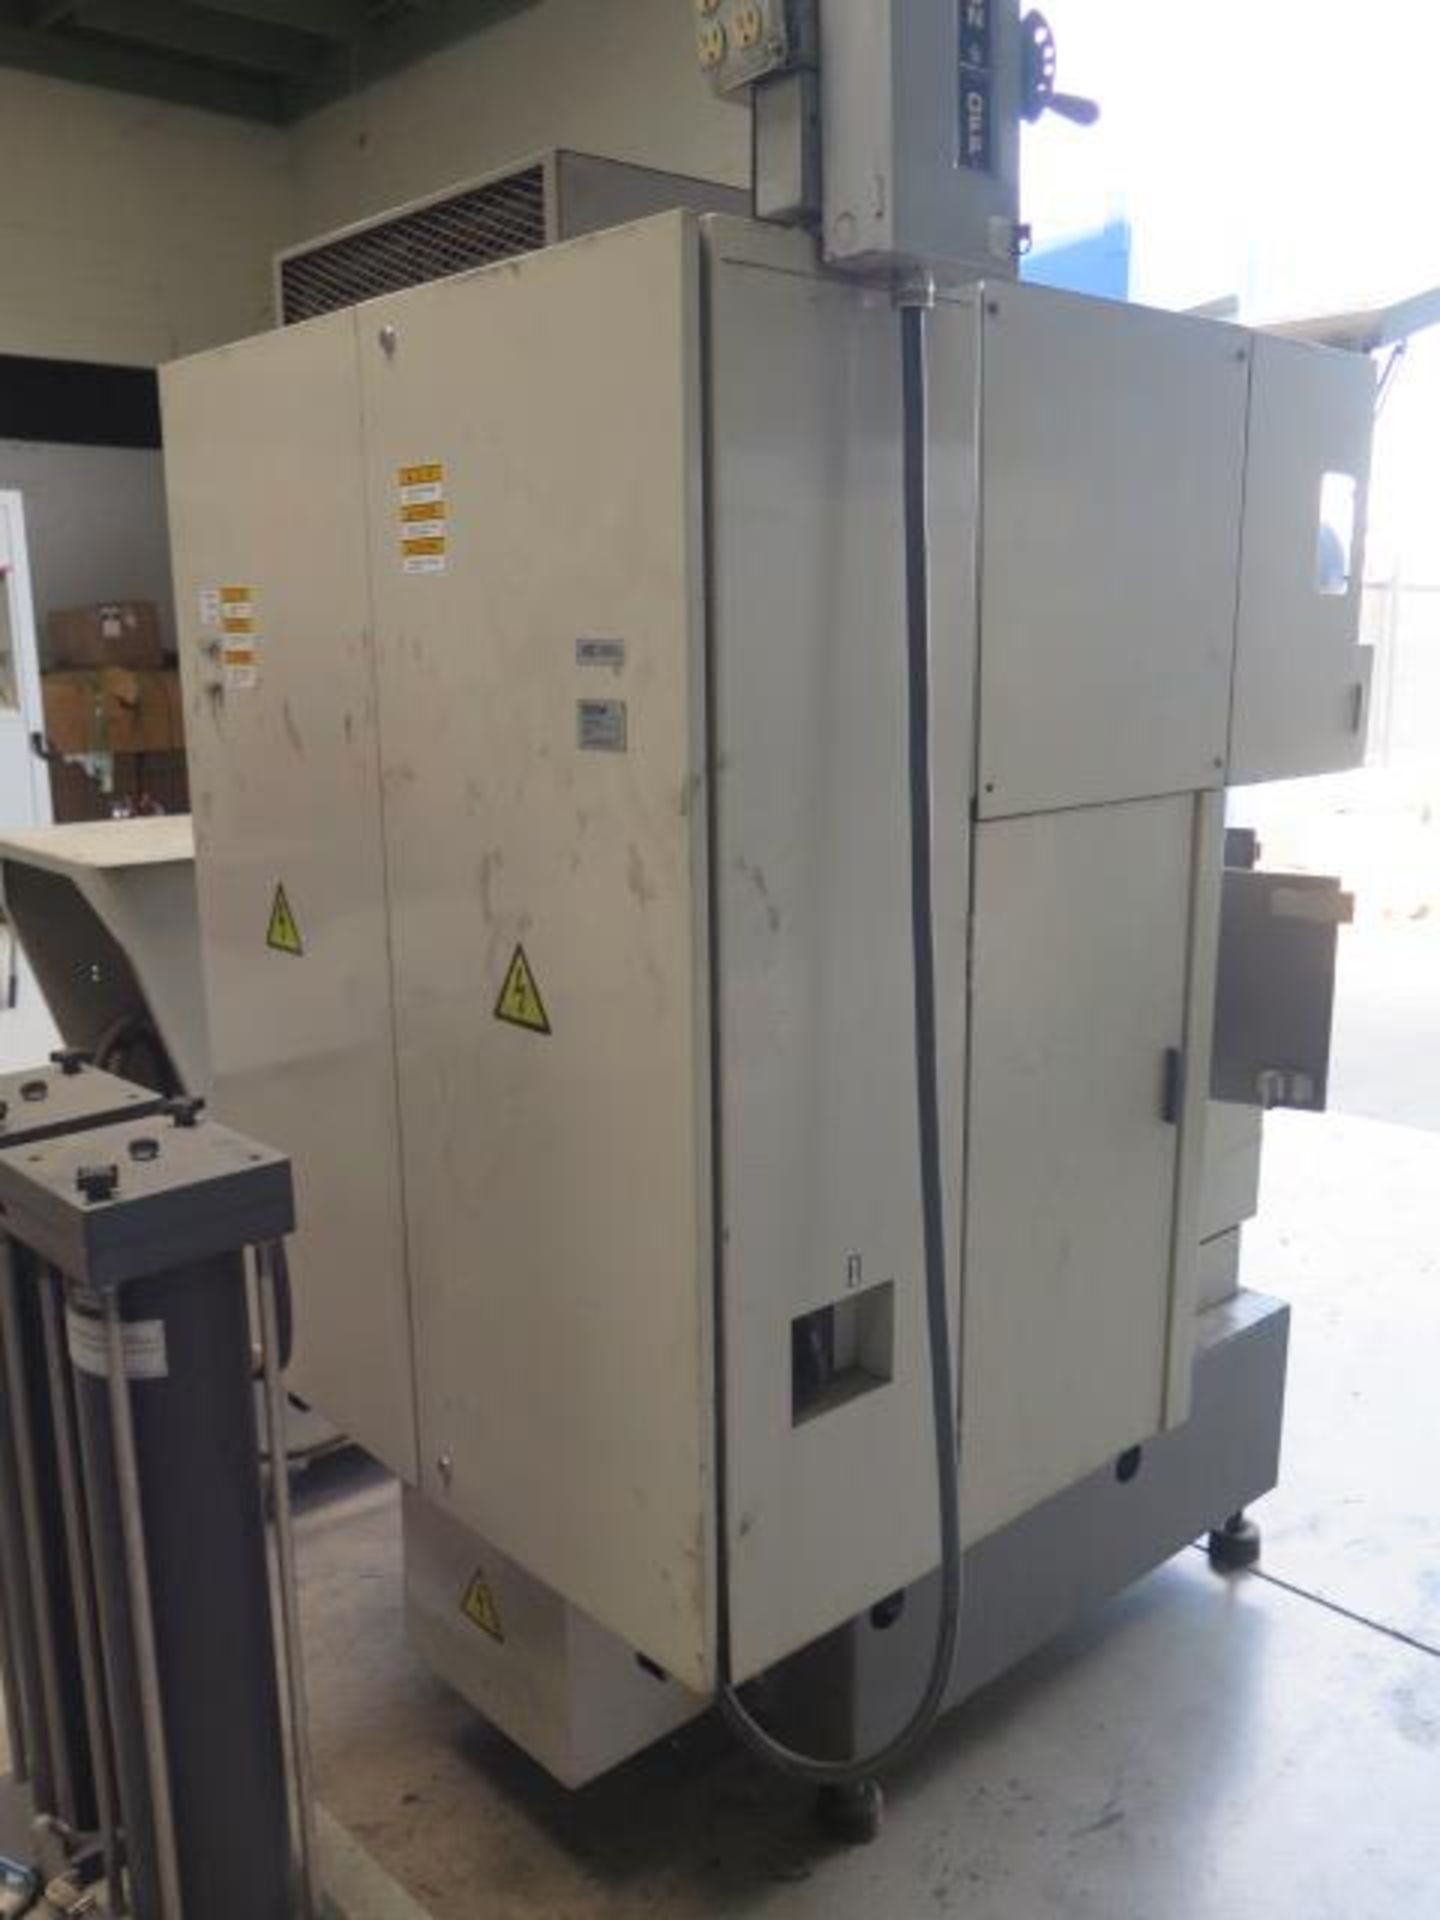 Brother HS-3100 CNC Wire EDM s/n 111120 w/ Brother CNC Controls, 8 3/4" x 11" Work Area, SOLD AS IS - Image 12 of 13